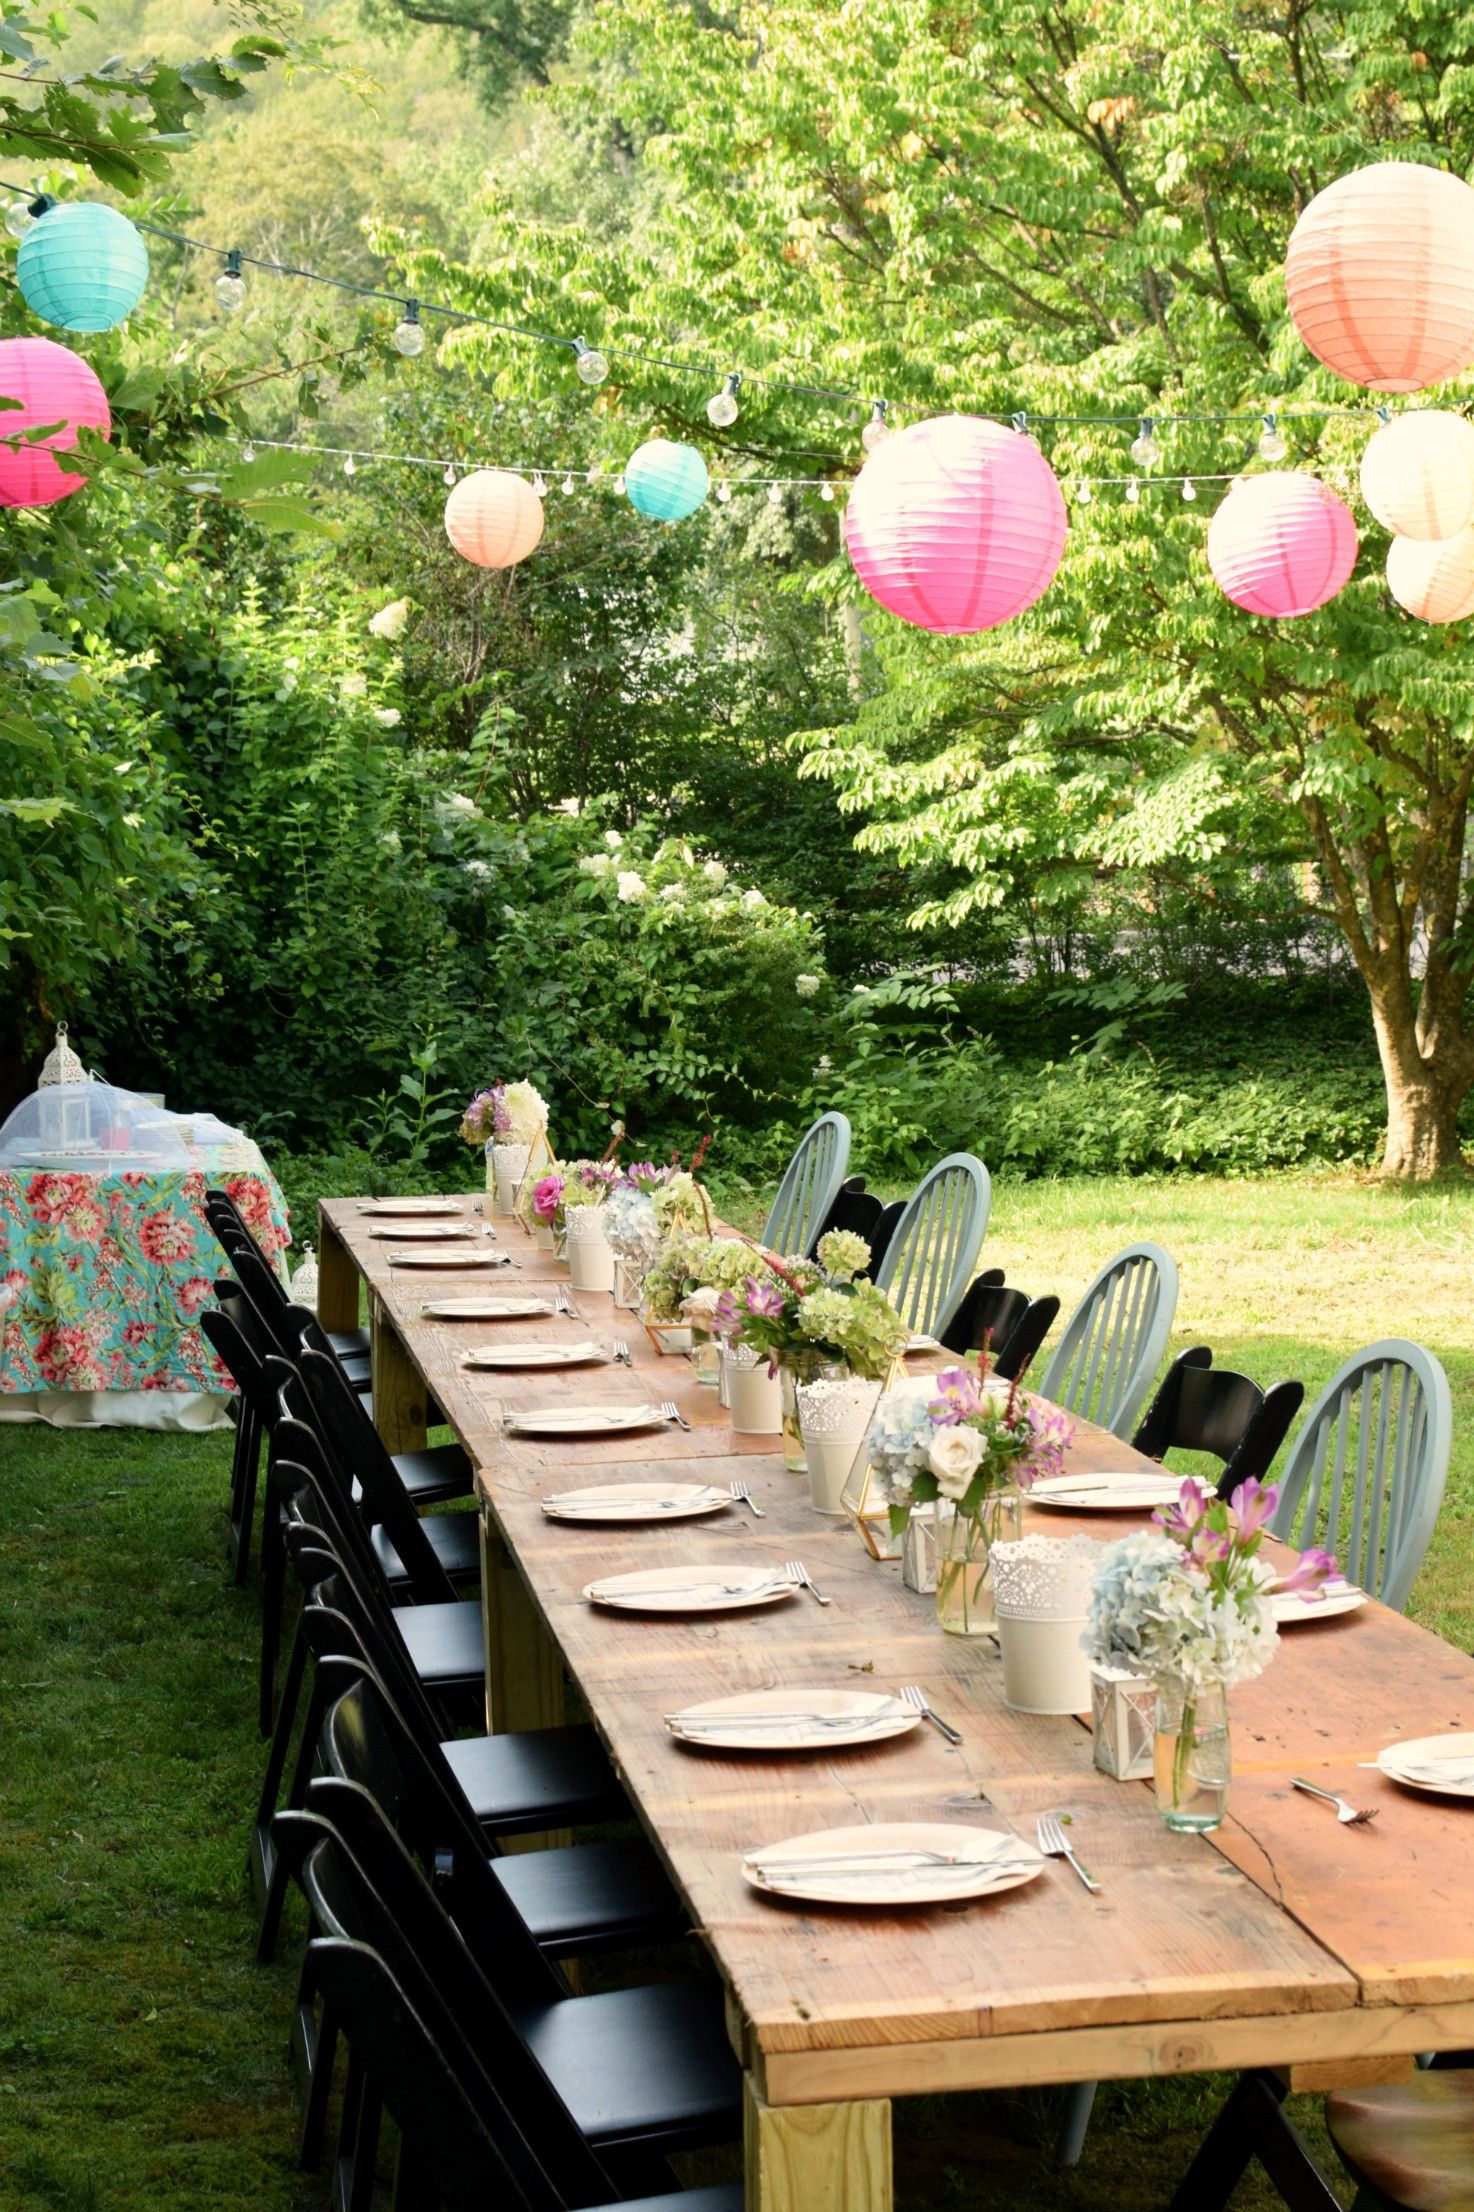 Garden Themed Birthday Party
 Charming Garden Party perfect for your next party idea